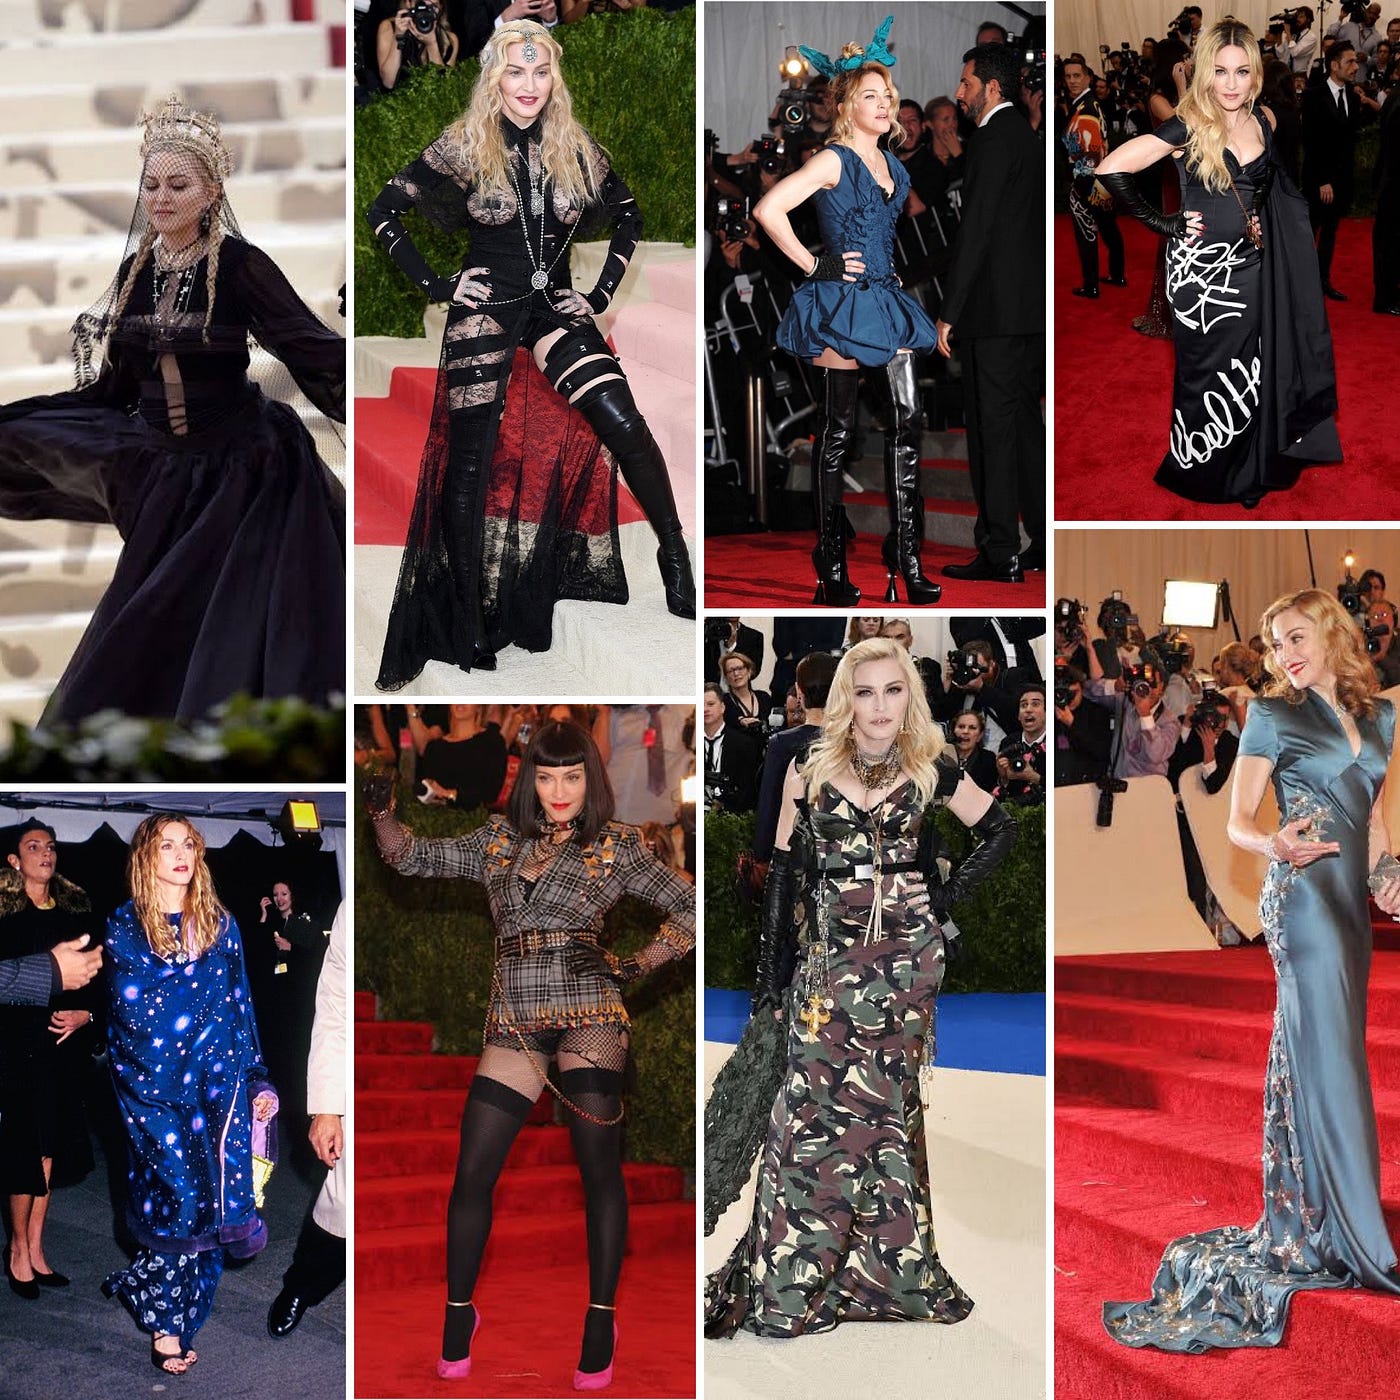 Madonna at the Met Gala: See the Star's Most Outrageous Red Carpet Looks